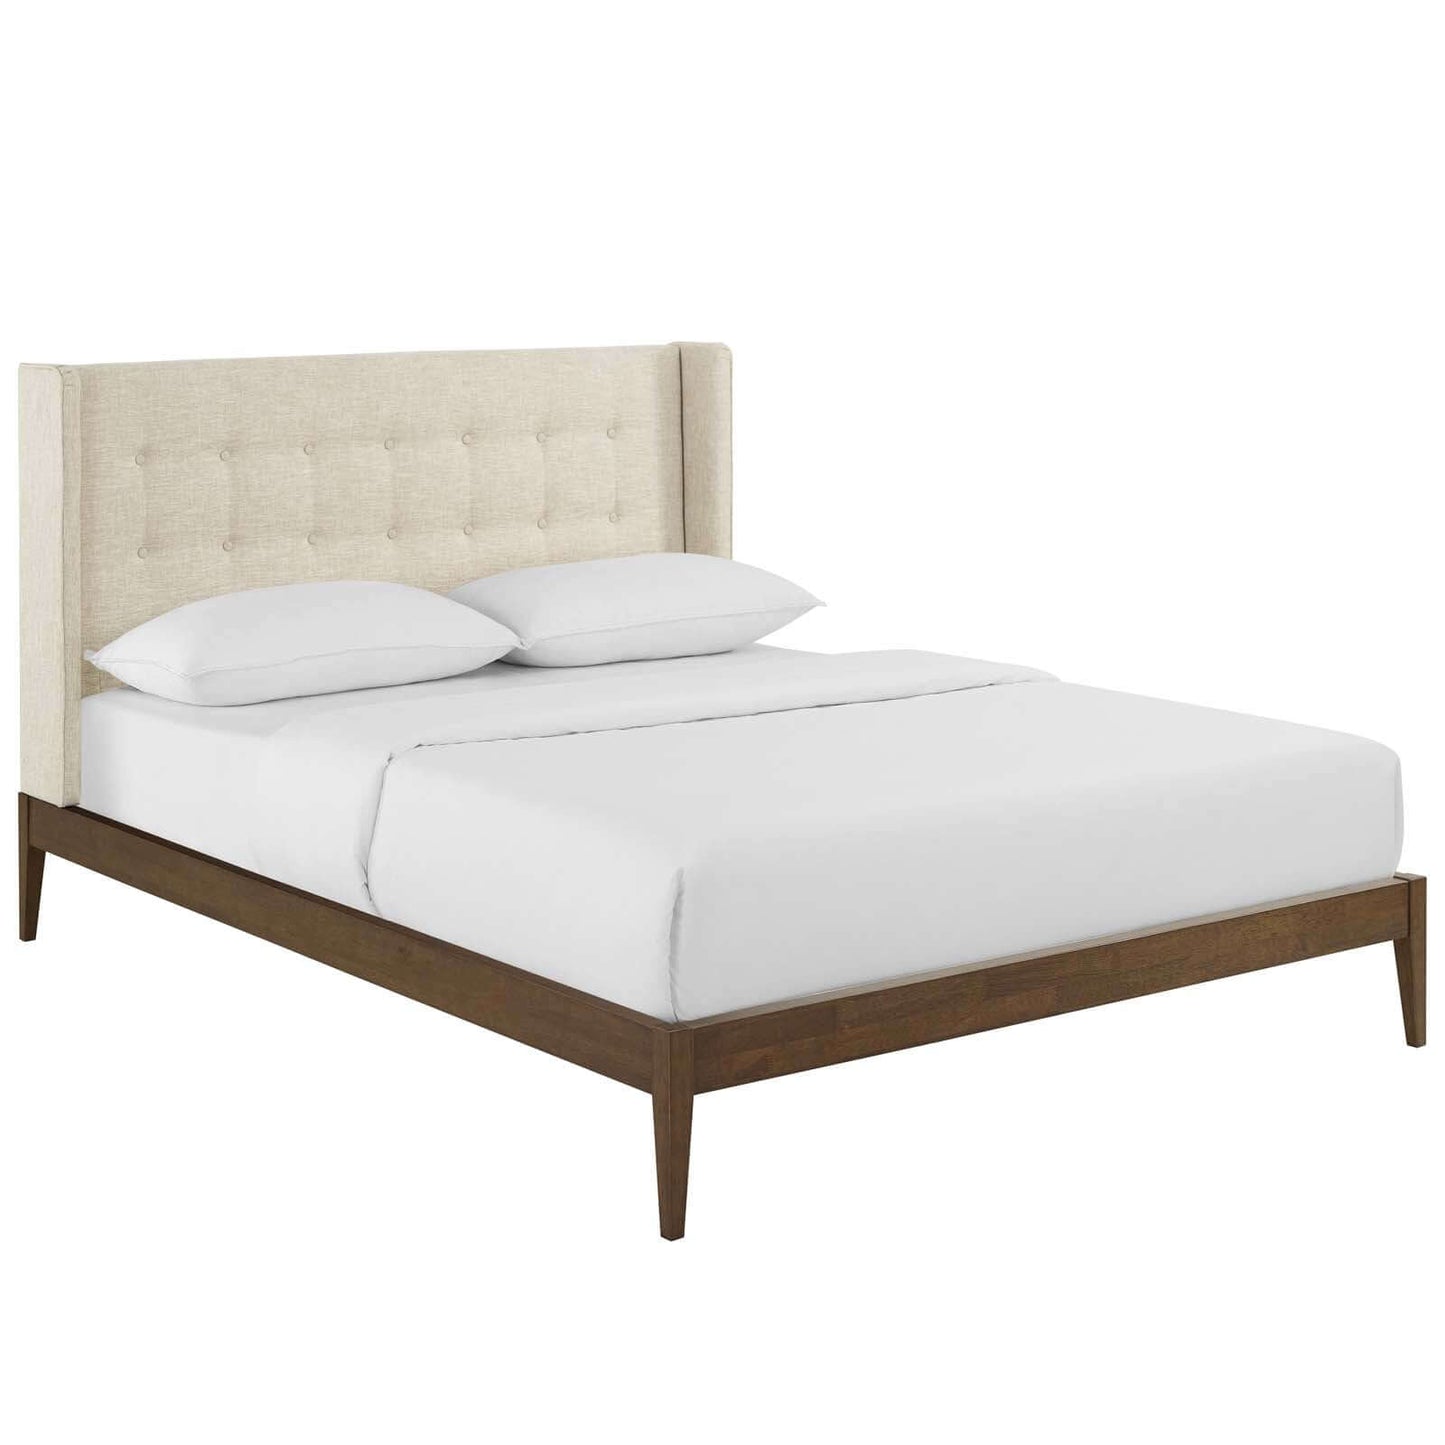 Modway Hadley Wingback Upholstered Polyester Fabric Platform Bed MOD-6003-BEI